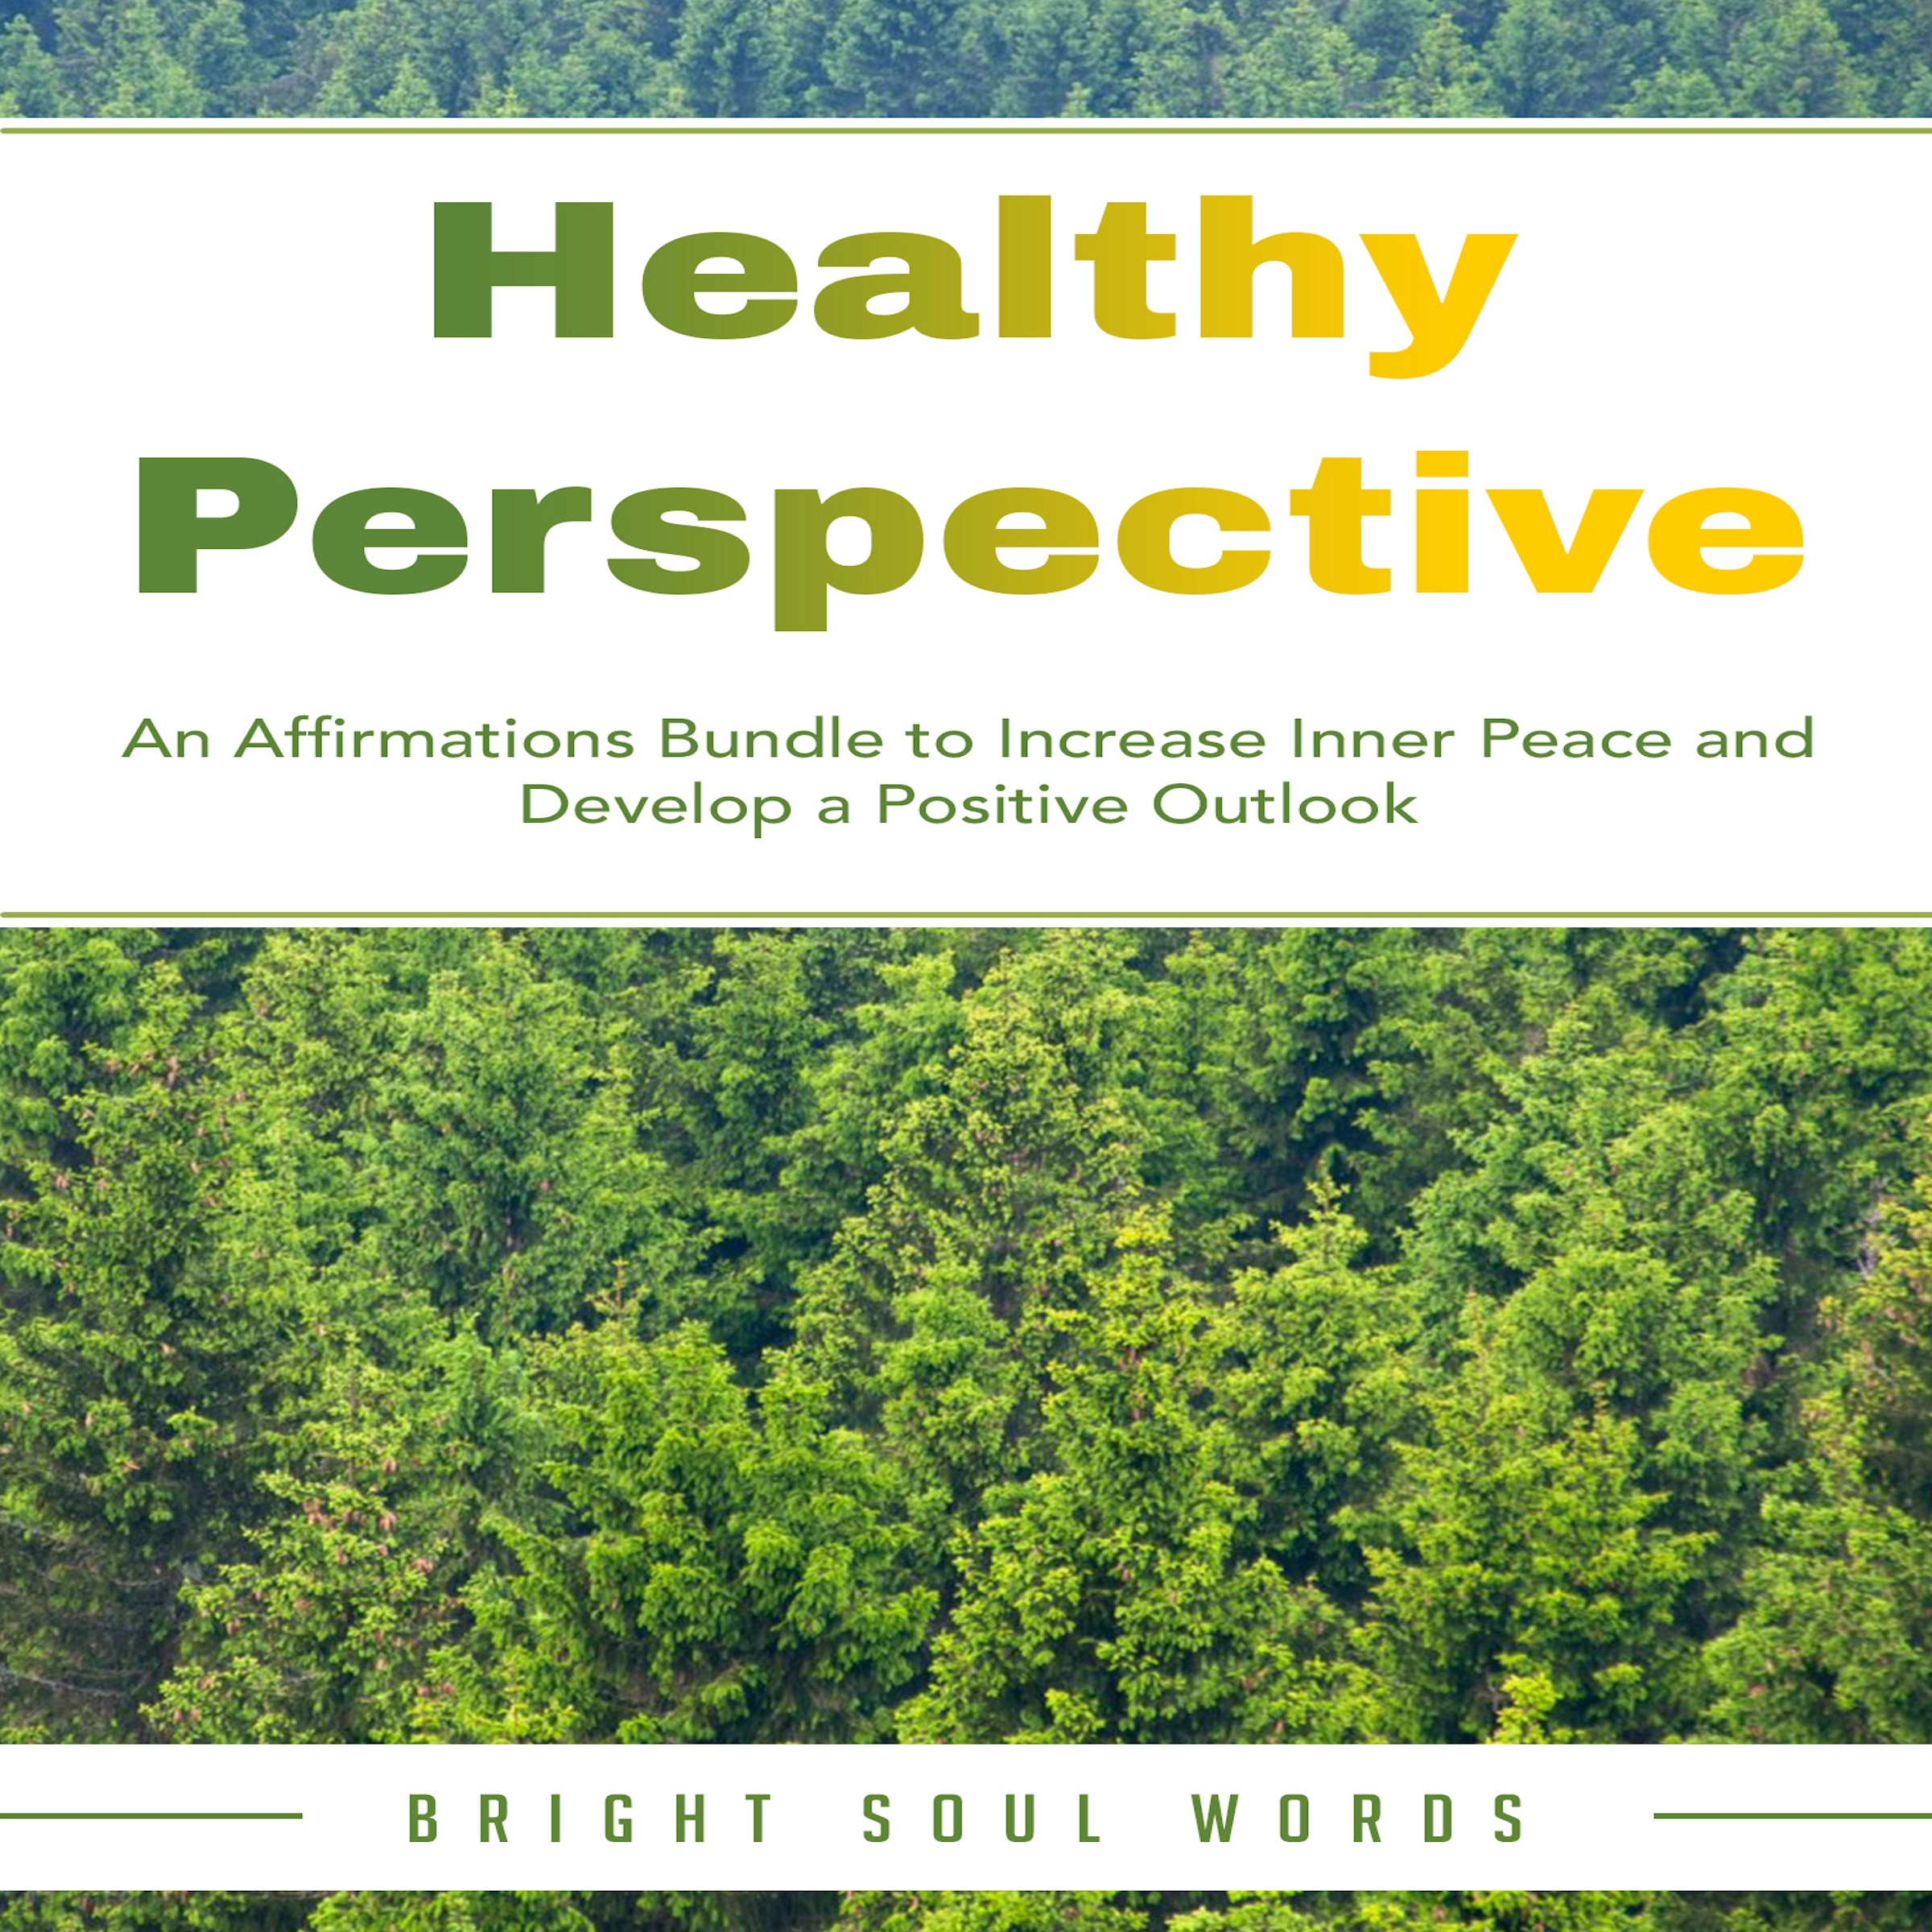 Healthy Perspective: An Affirmations Bundle to Increase Inner Peace and Develop a Positive Outlook Audiobook by Bright Soul Words